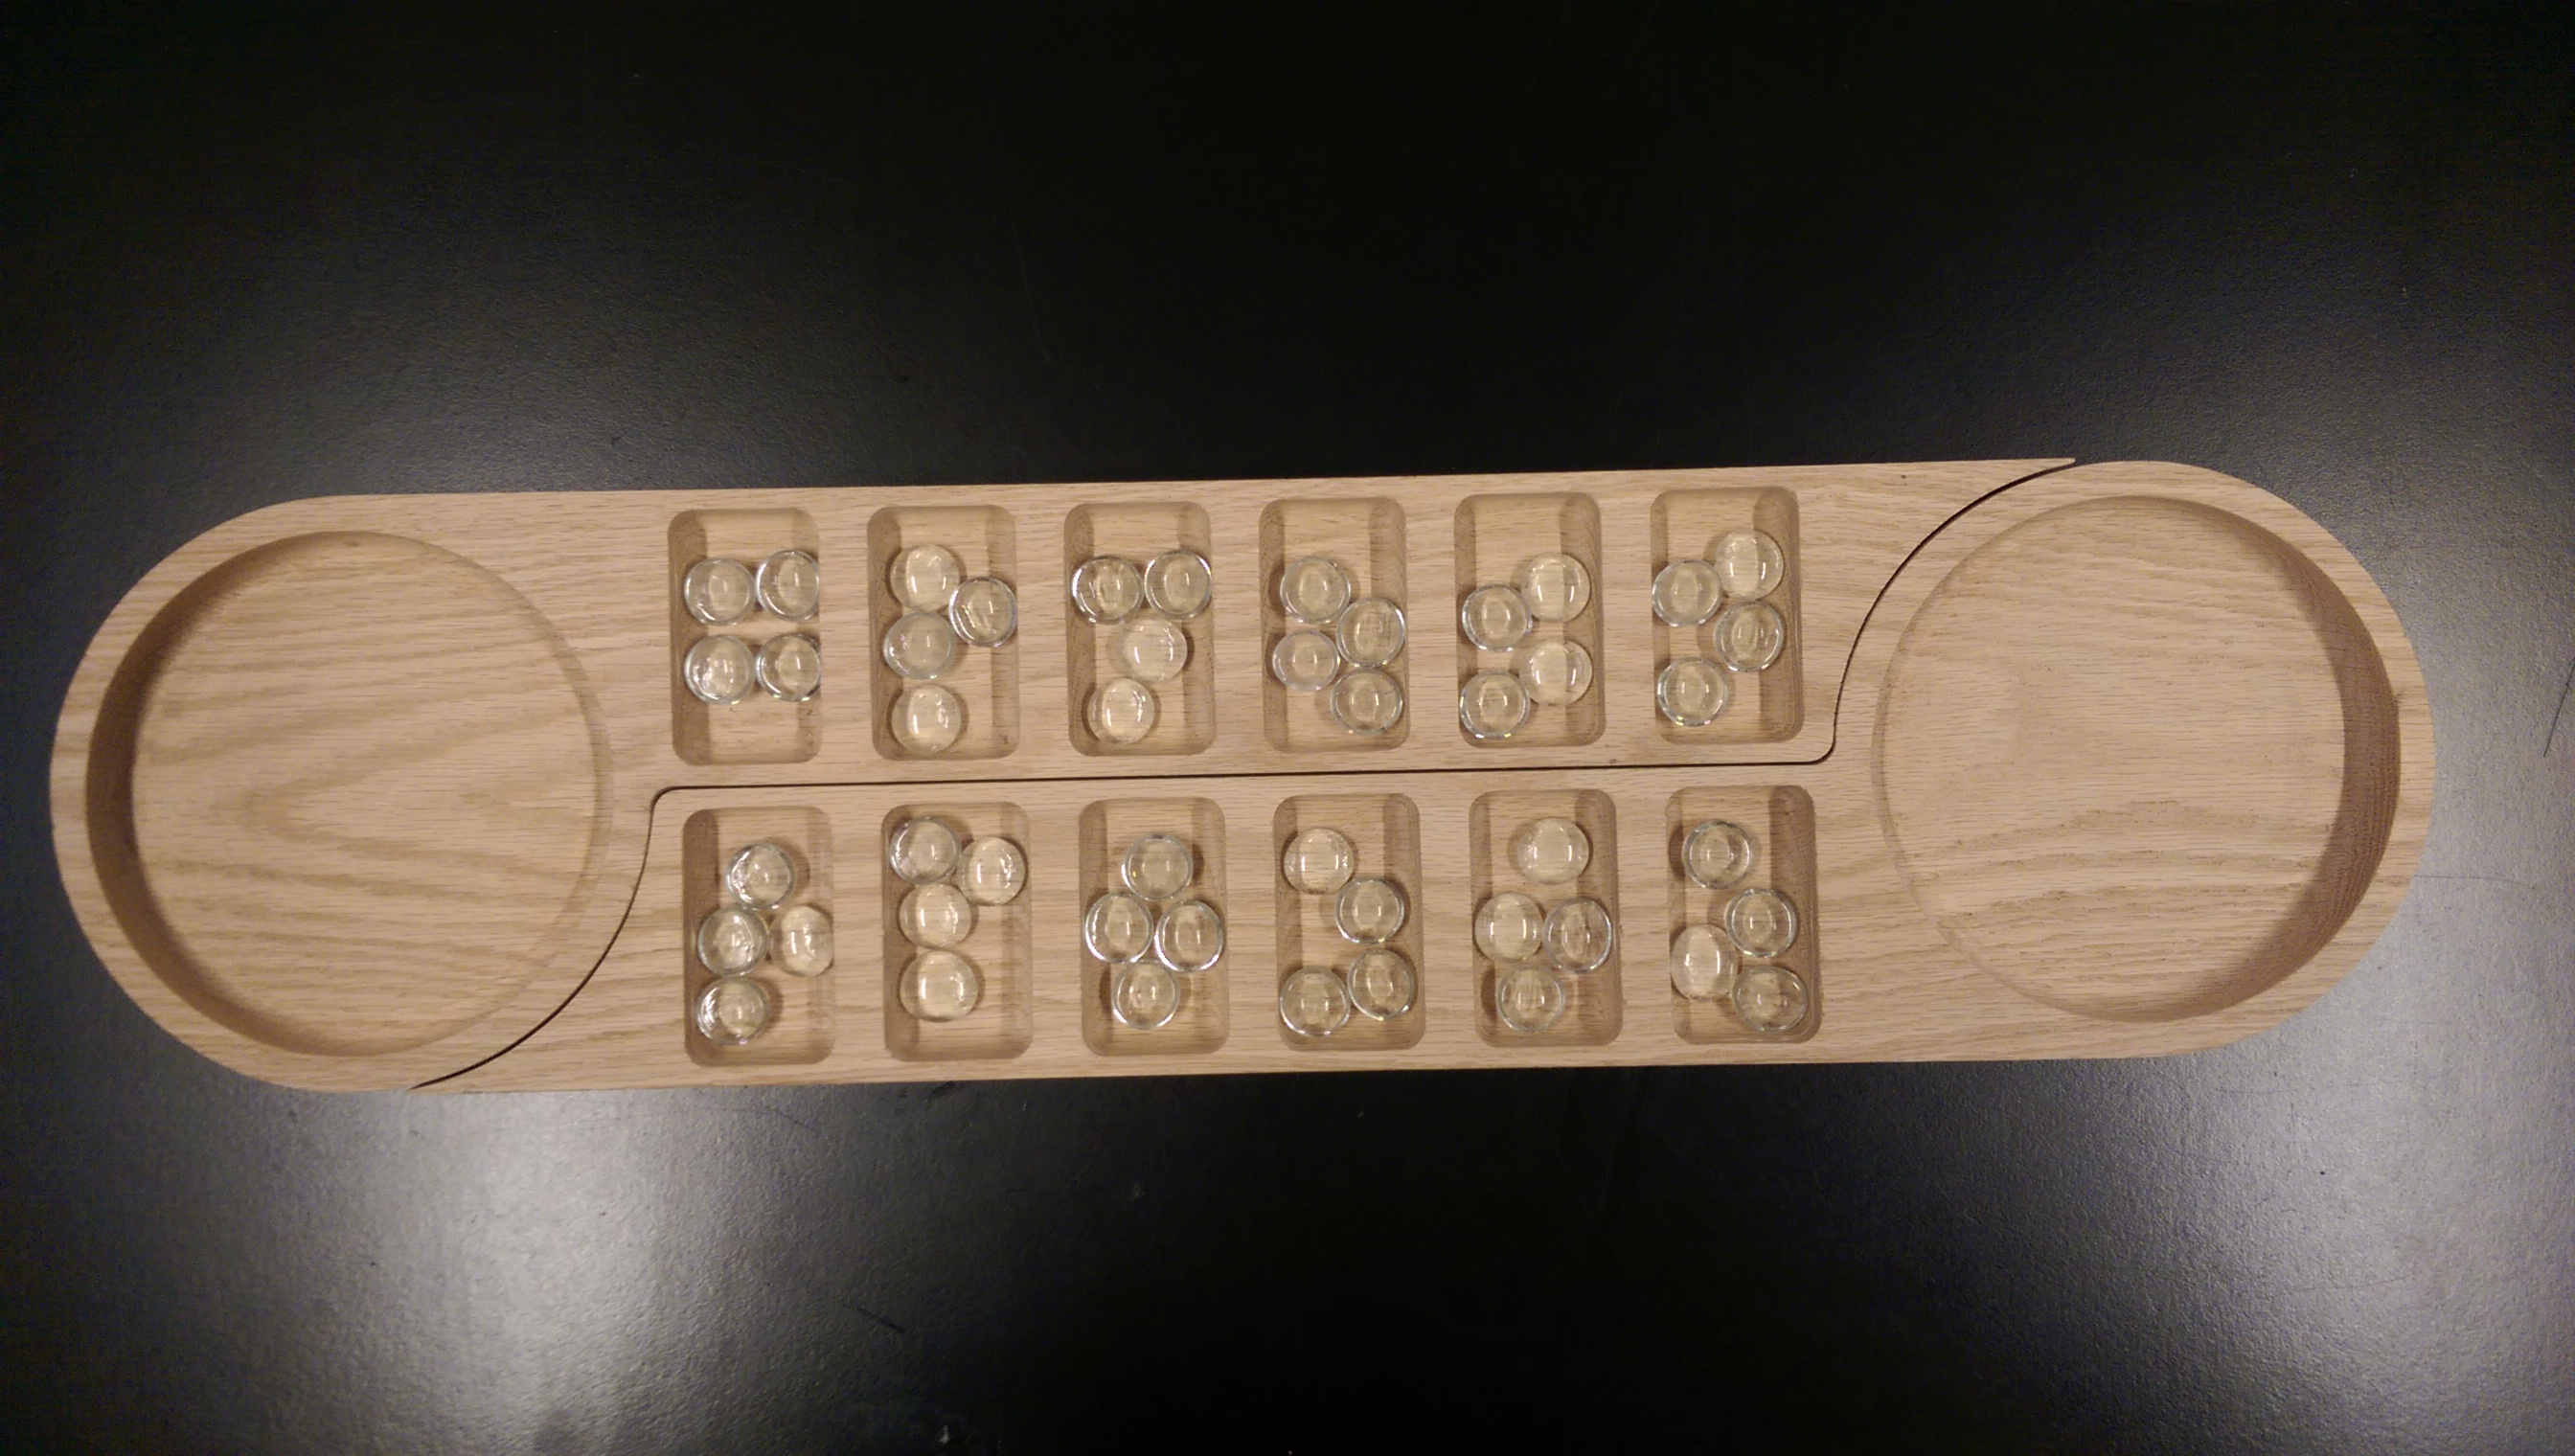 A mancala game that can be expanded for use by more than two players.